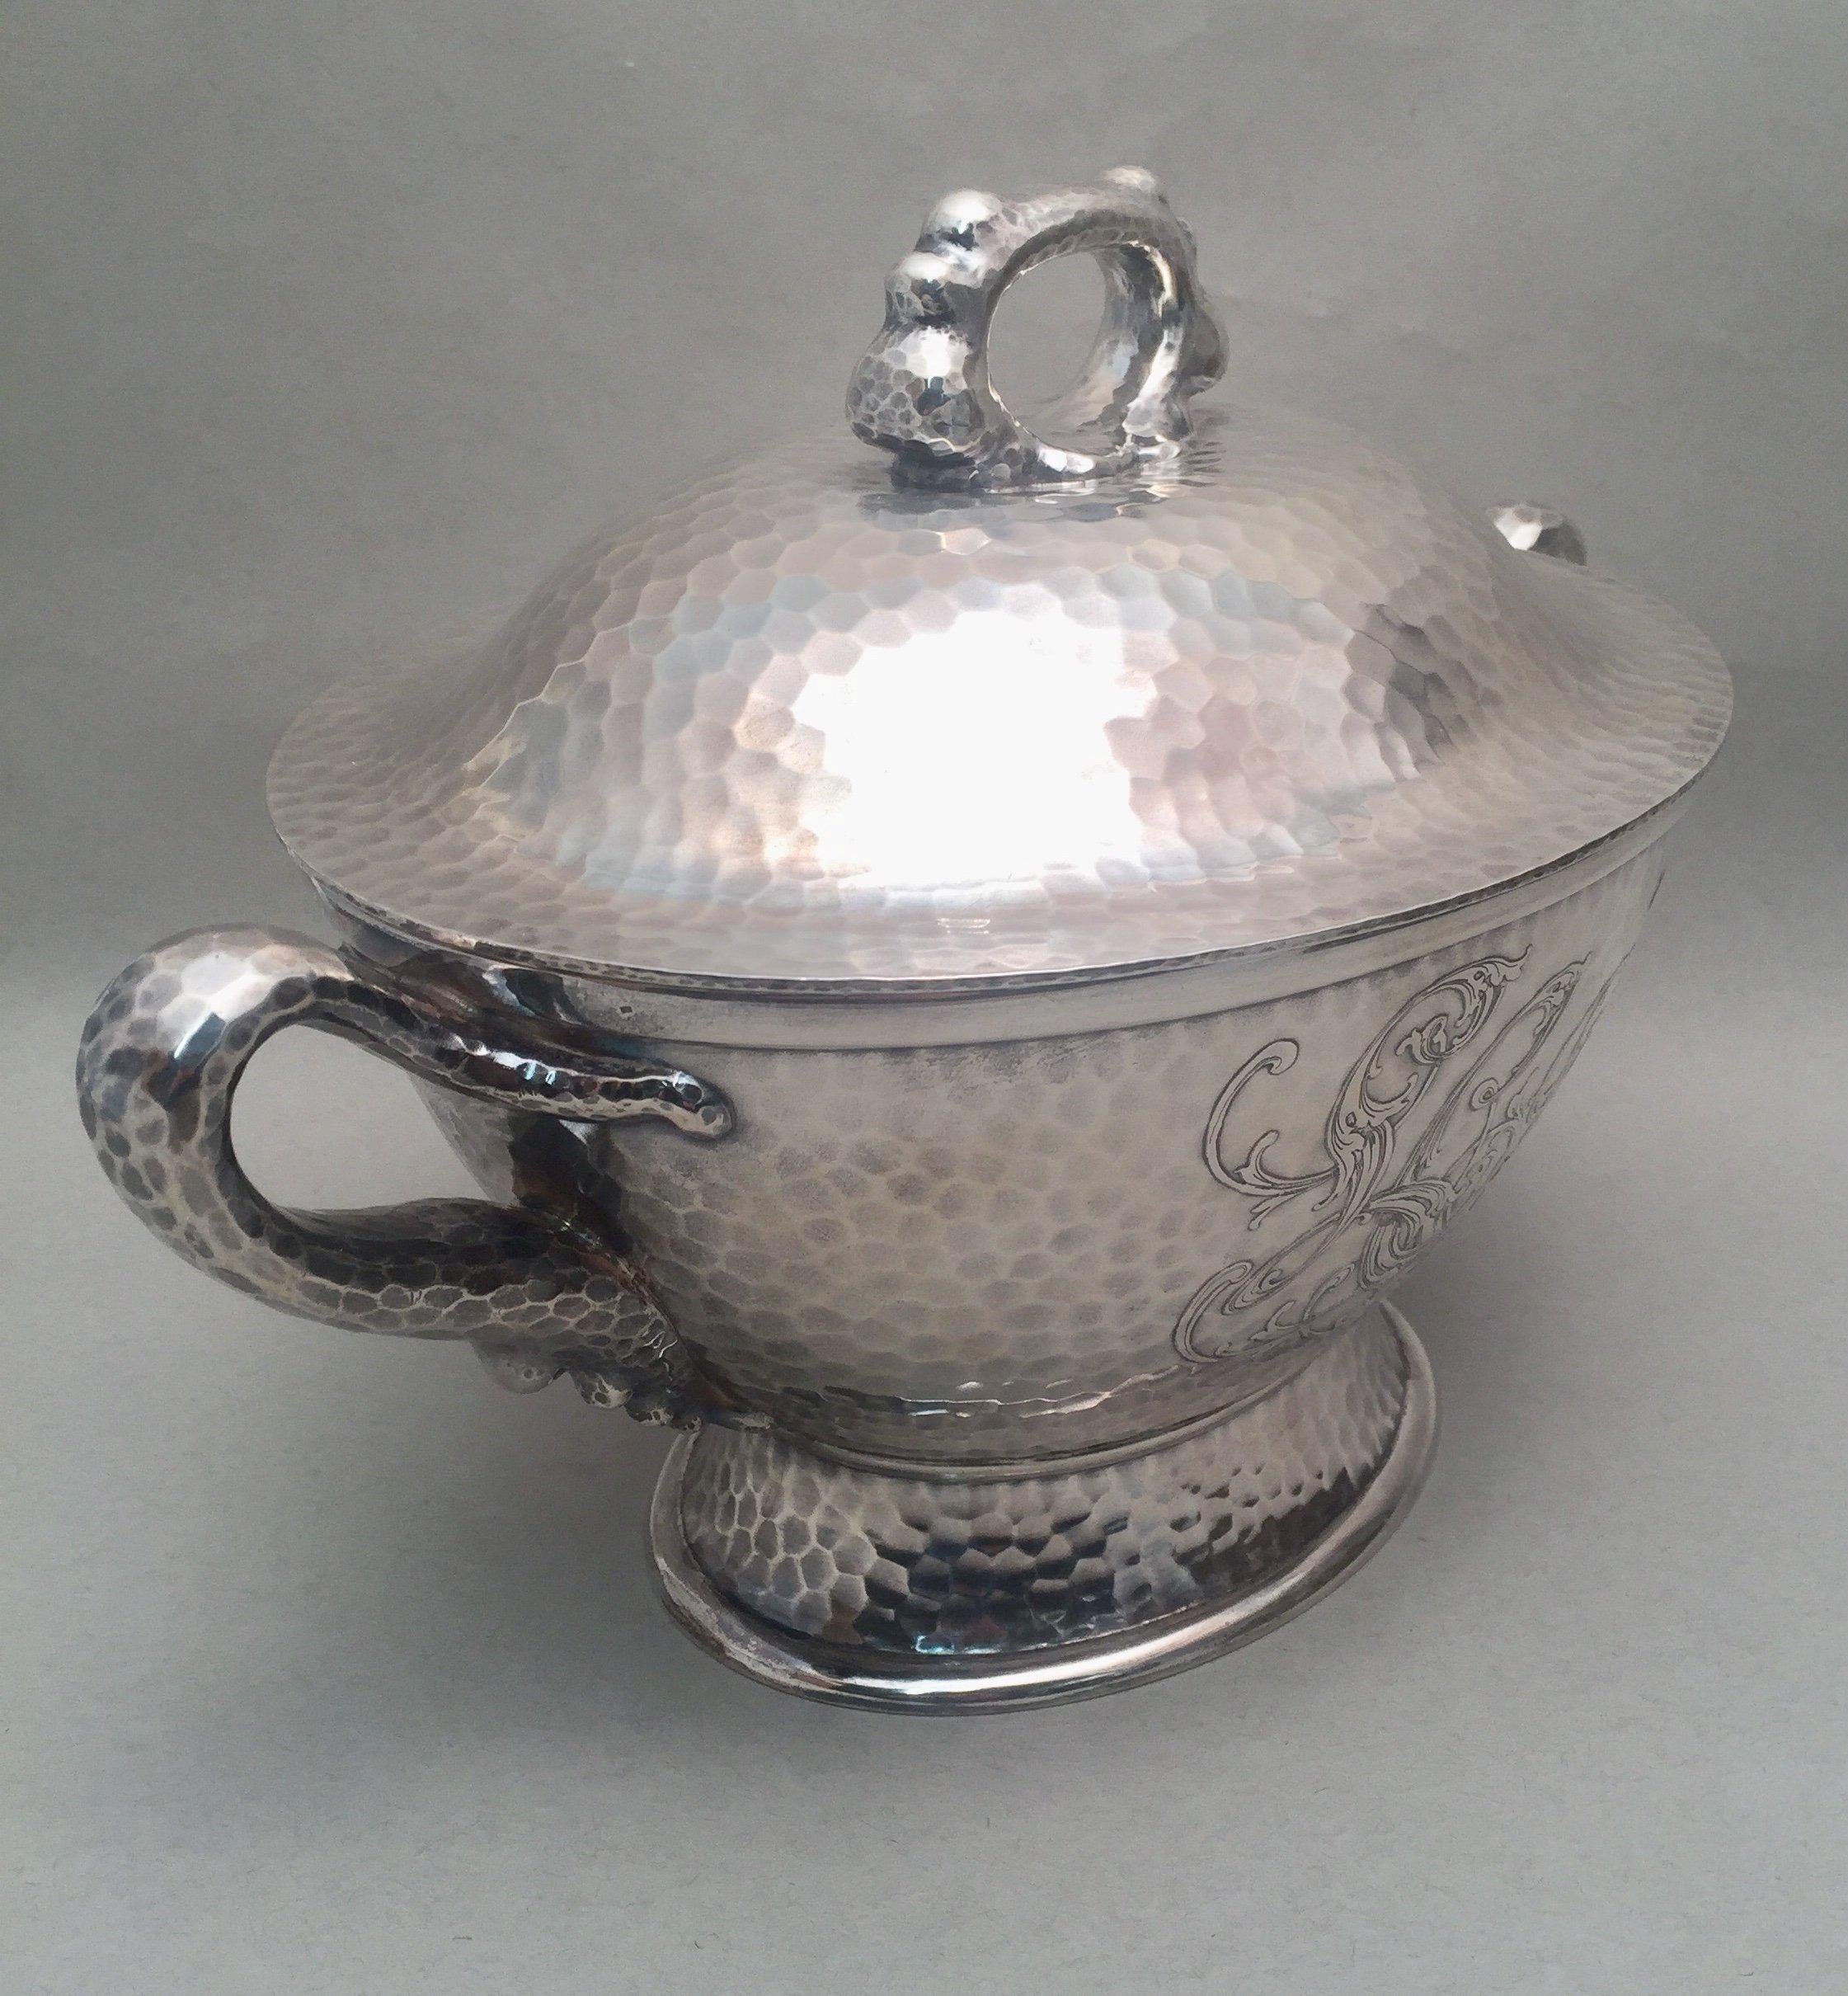 An impressive 1879 decorative sterling silver tureen by the outstanding American maker Tiffany & Co. Designed beautifully in a blunt hand hammered and waved handles, standing on base, special handwork in Japanesque style, which was extremely popular